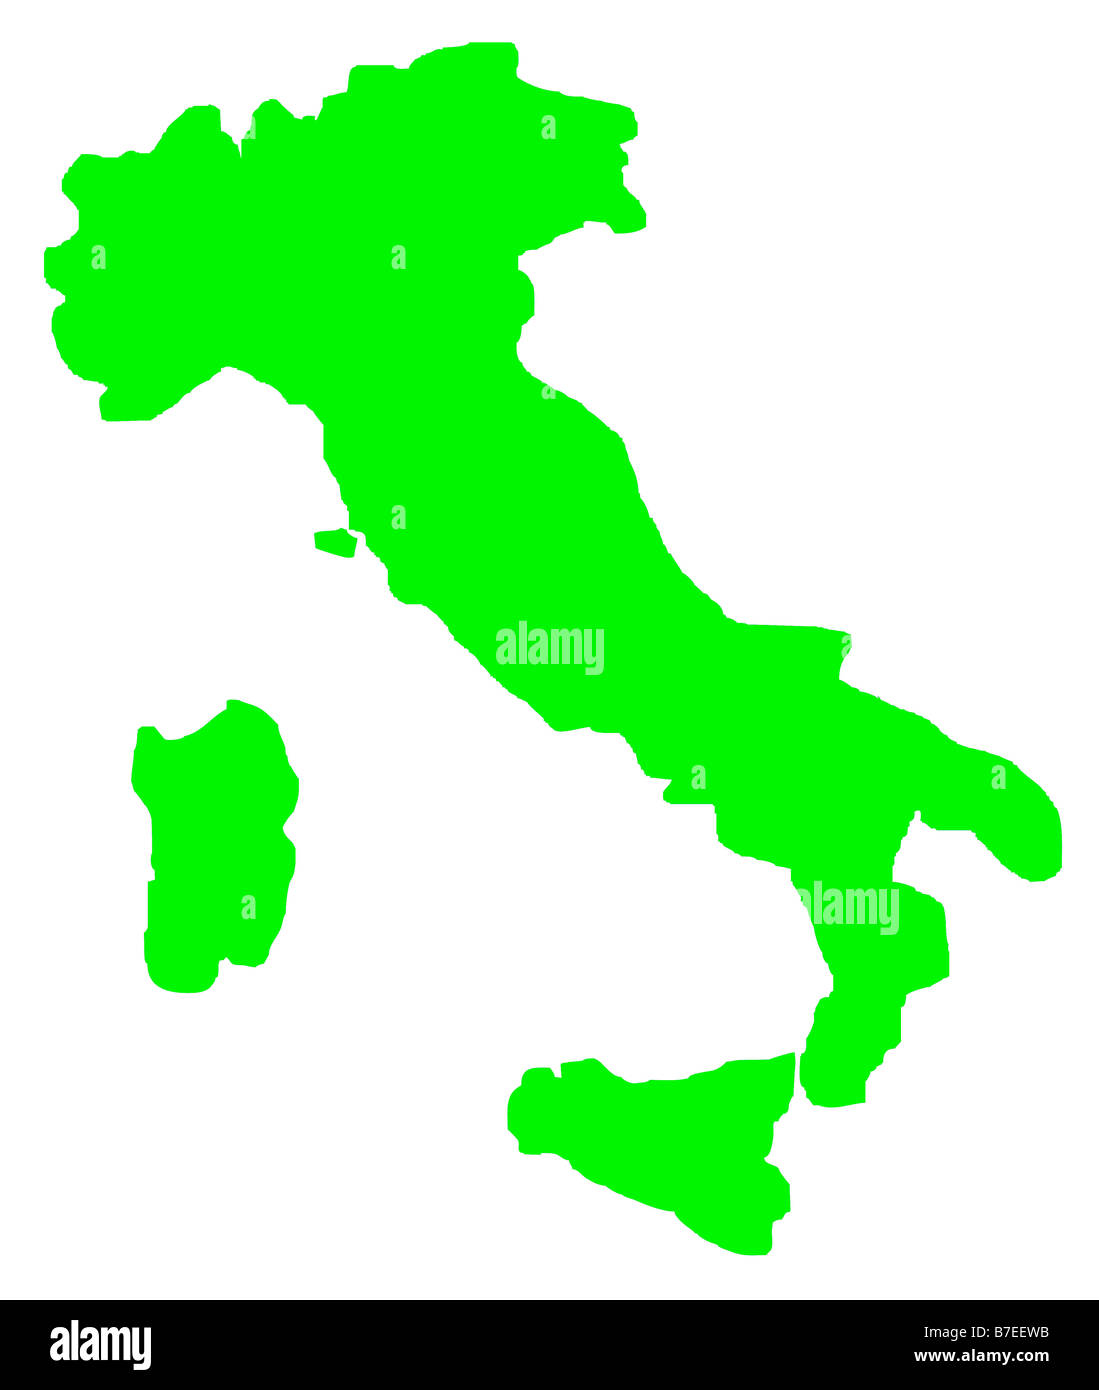 Outline map of Italy in green isolated on white background Stock Photo